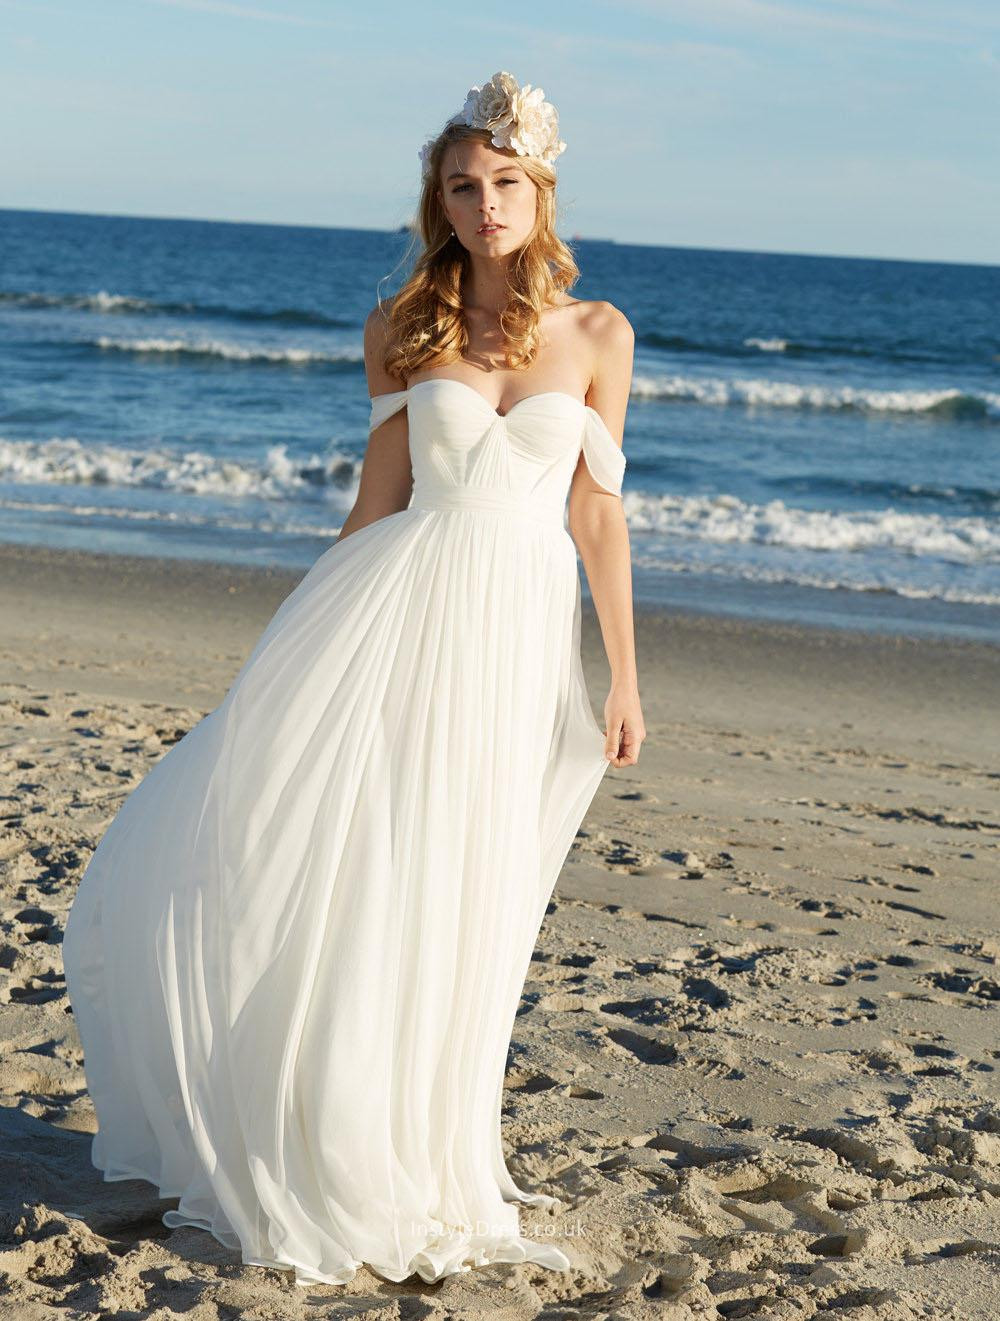 Beachy Wedding Dresses
 I Want It All Fashion Beauty and Lifestyle Blog